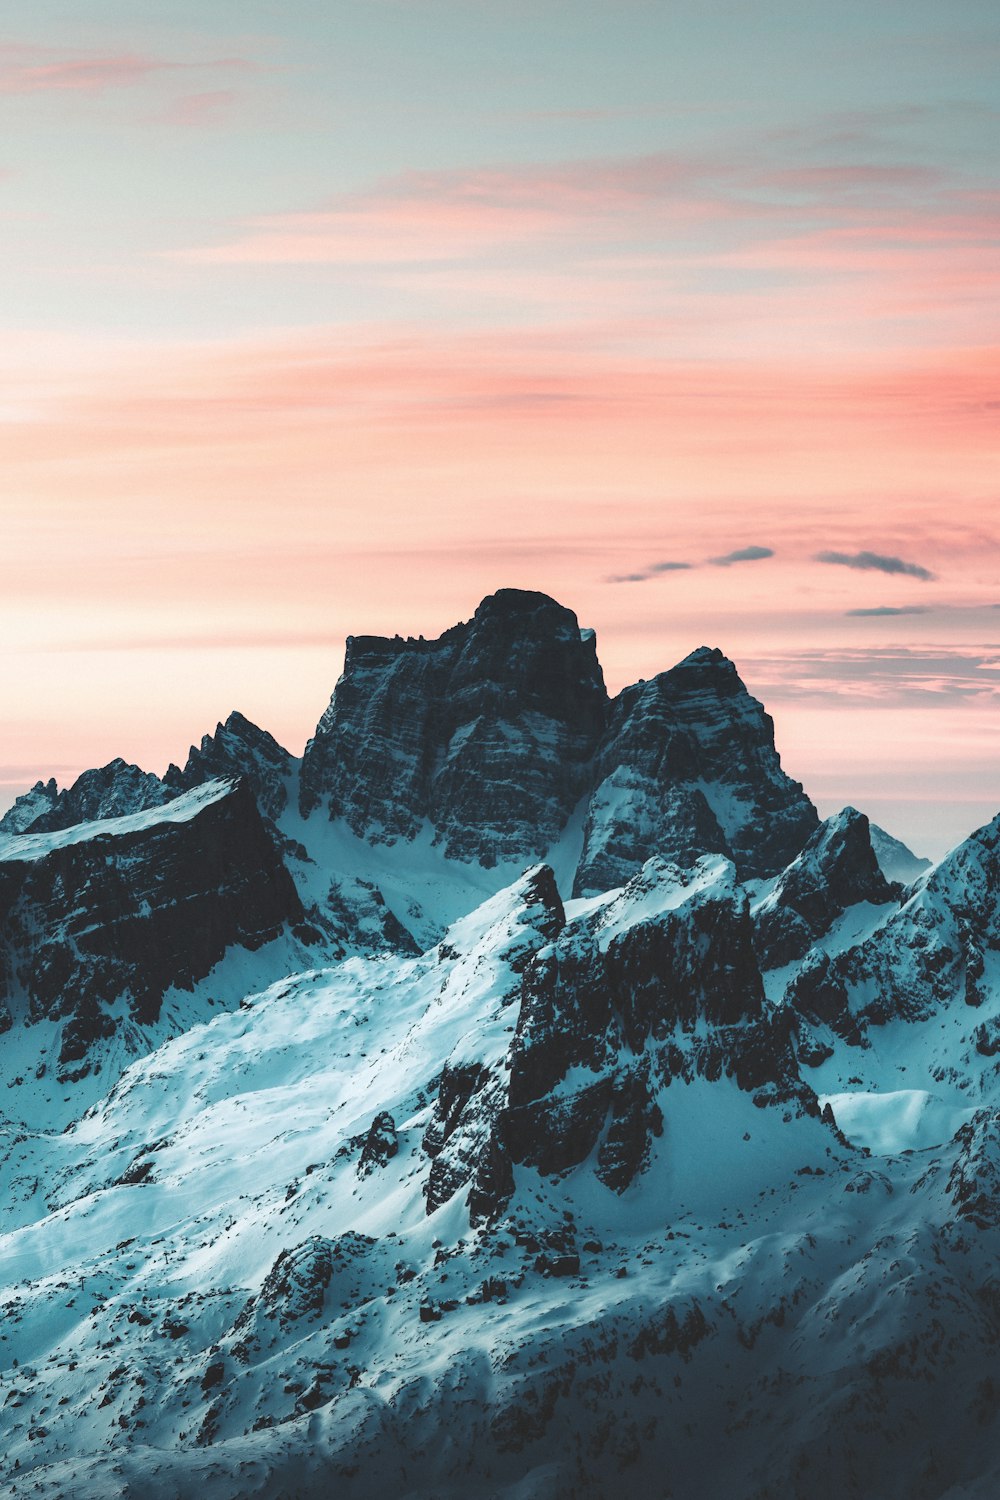 a group of mountains covered in snow under a pink sky